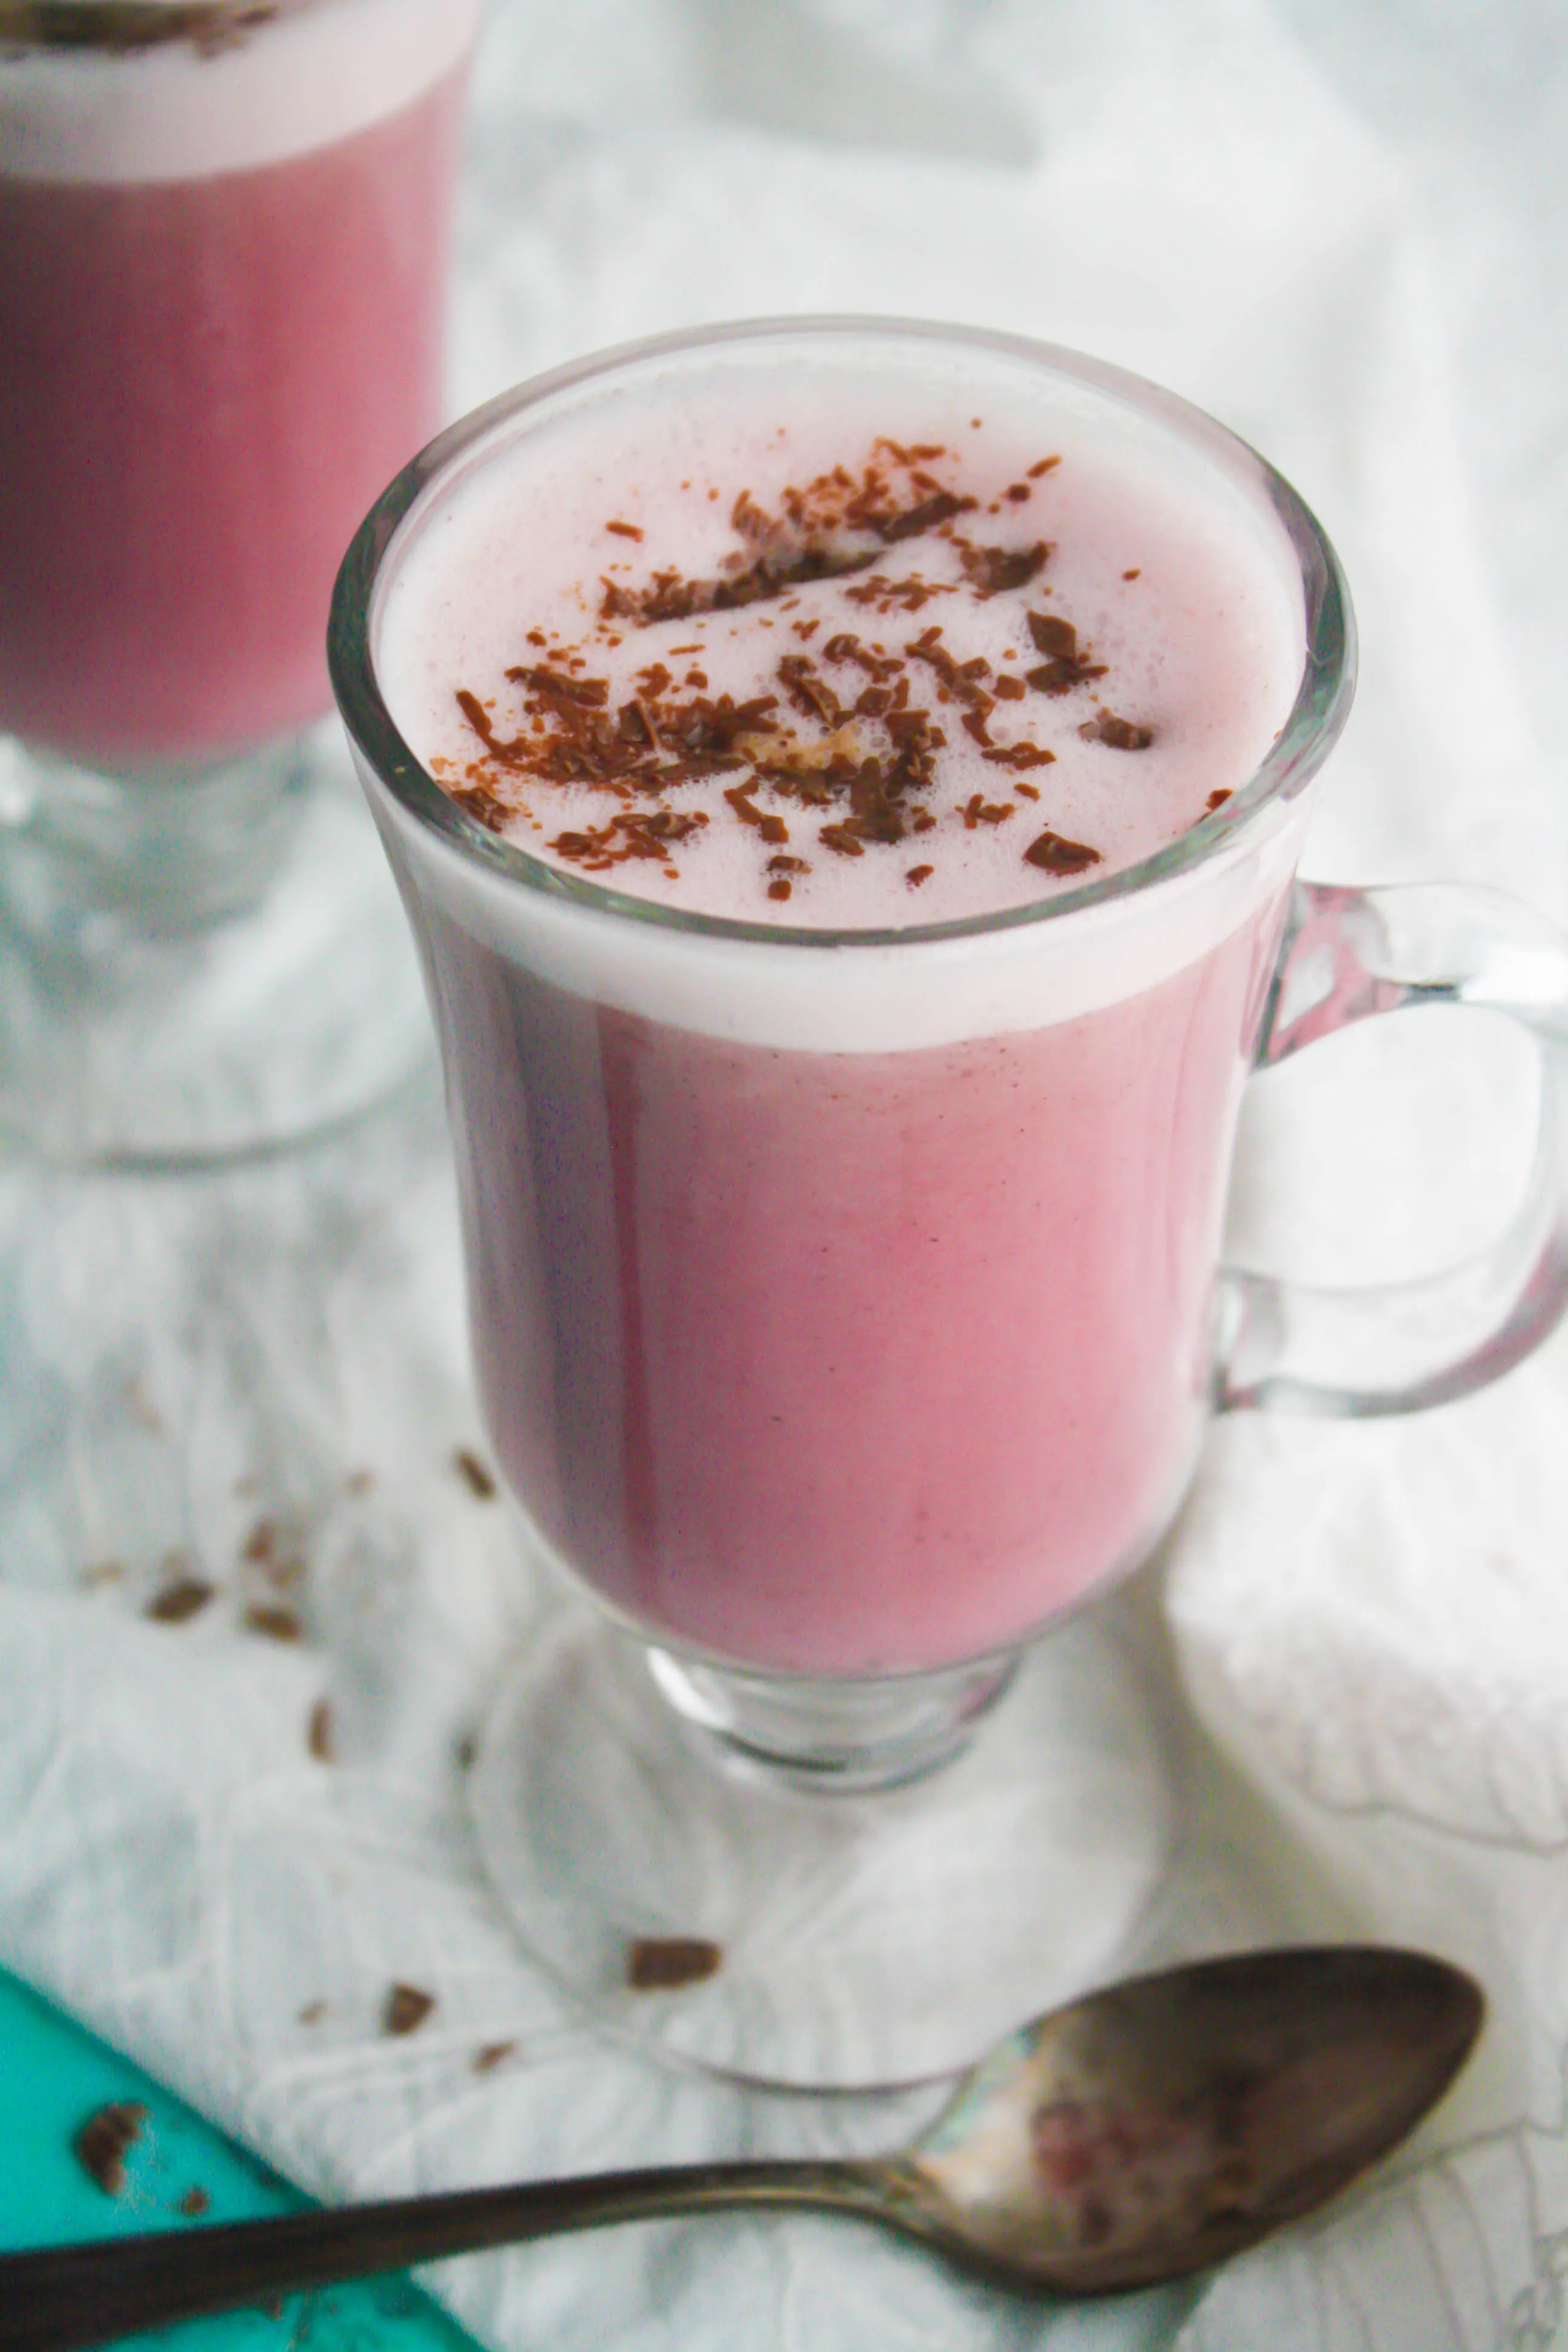 Spiced Beet and Oat Milk Latte is a tasty non-dairy, warming beverage.